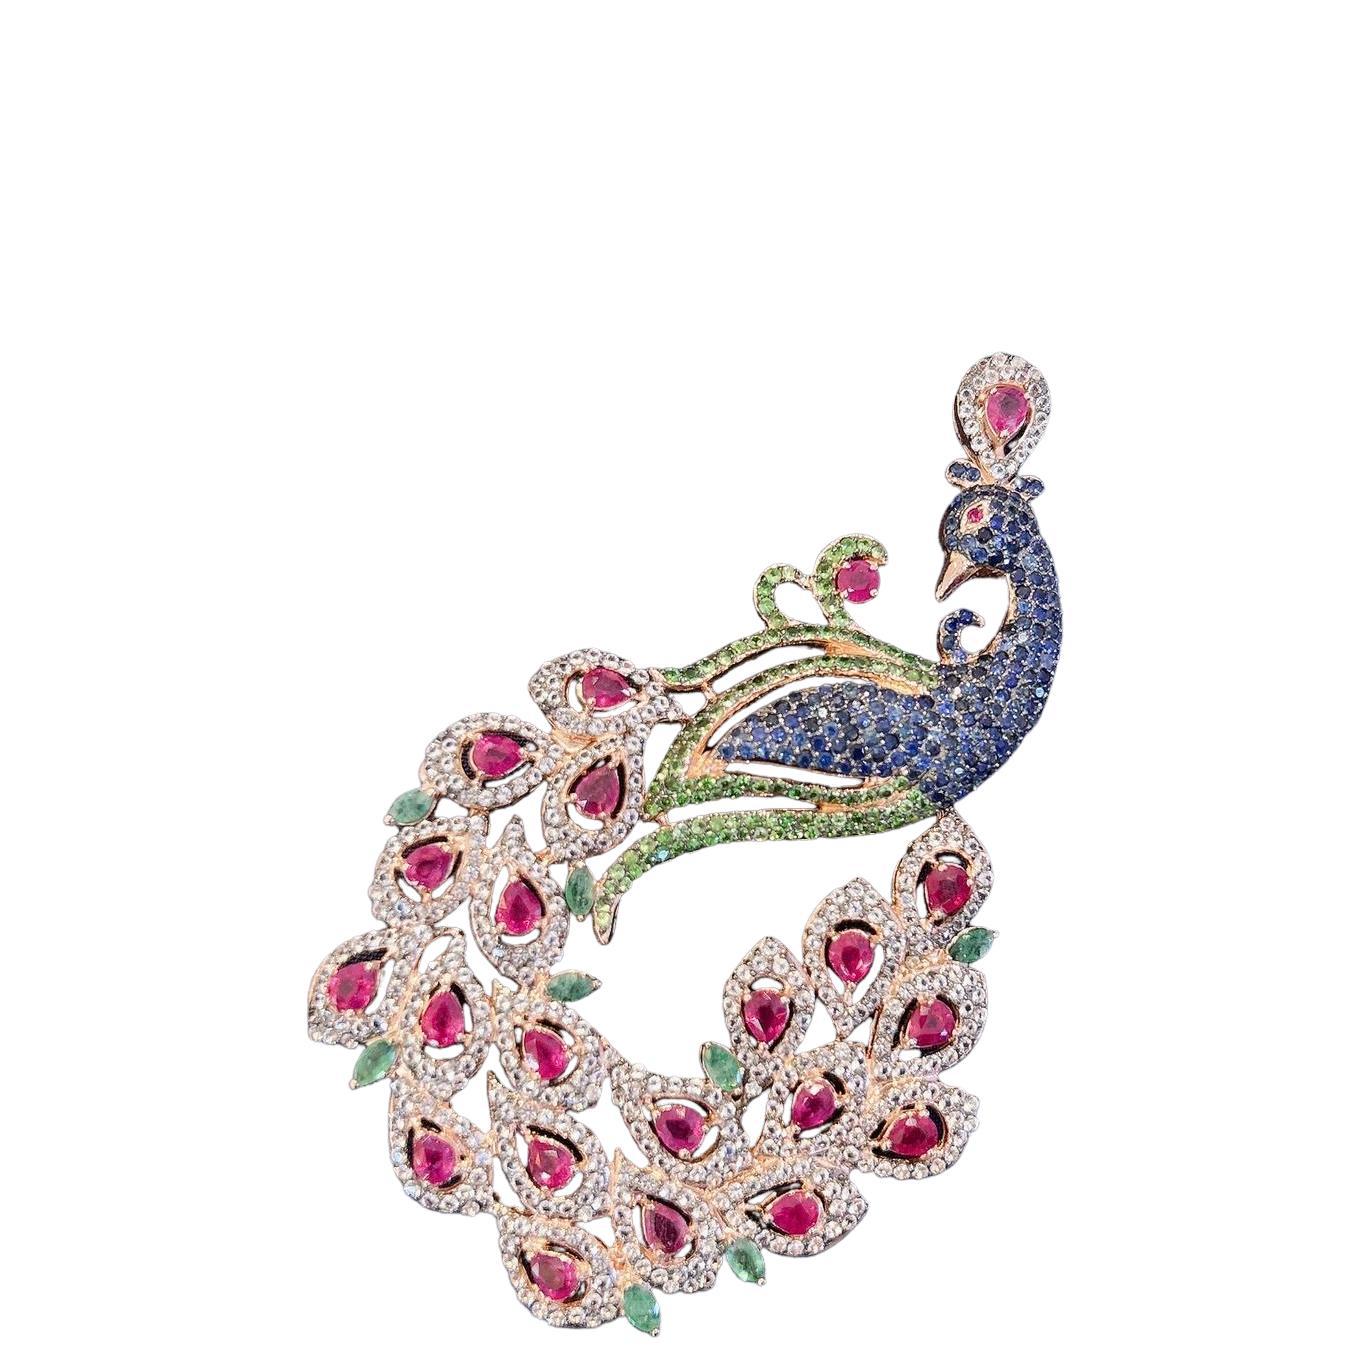 Bochic “Orient Swan” Blue Sapphire, Emerald, Ruby Brooch In 22K Gold & Silver 
From the “Orient” collection 
Natural Blue Sapphire - 3 carats 
From Sri Lanka
Natural Red Rubies  - 16 carats 
Pear shapes 
Natural Green Emeralds from Zambia 
White